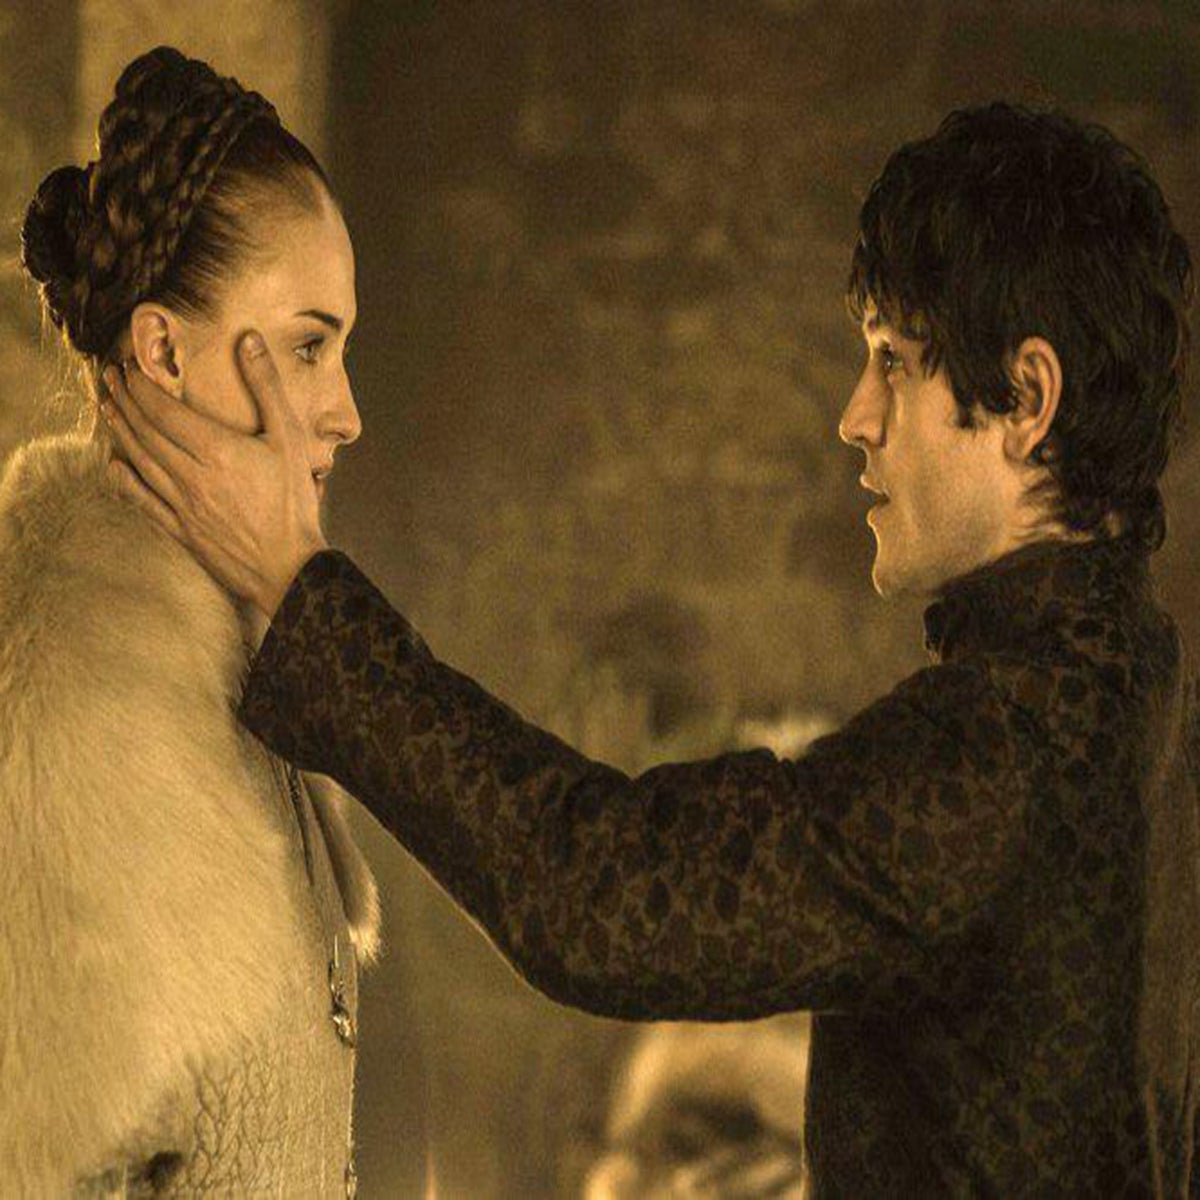 Xxx Rep Videos Com - Game of Thrones: Please stop using rape as a plot device â€” it's lazy and  unoriginal | The Independent | The Independent